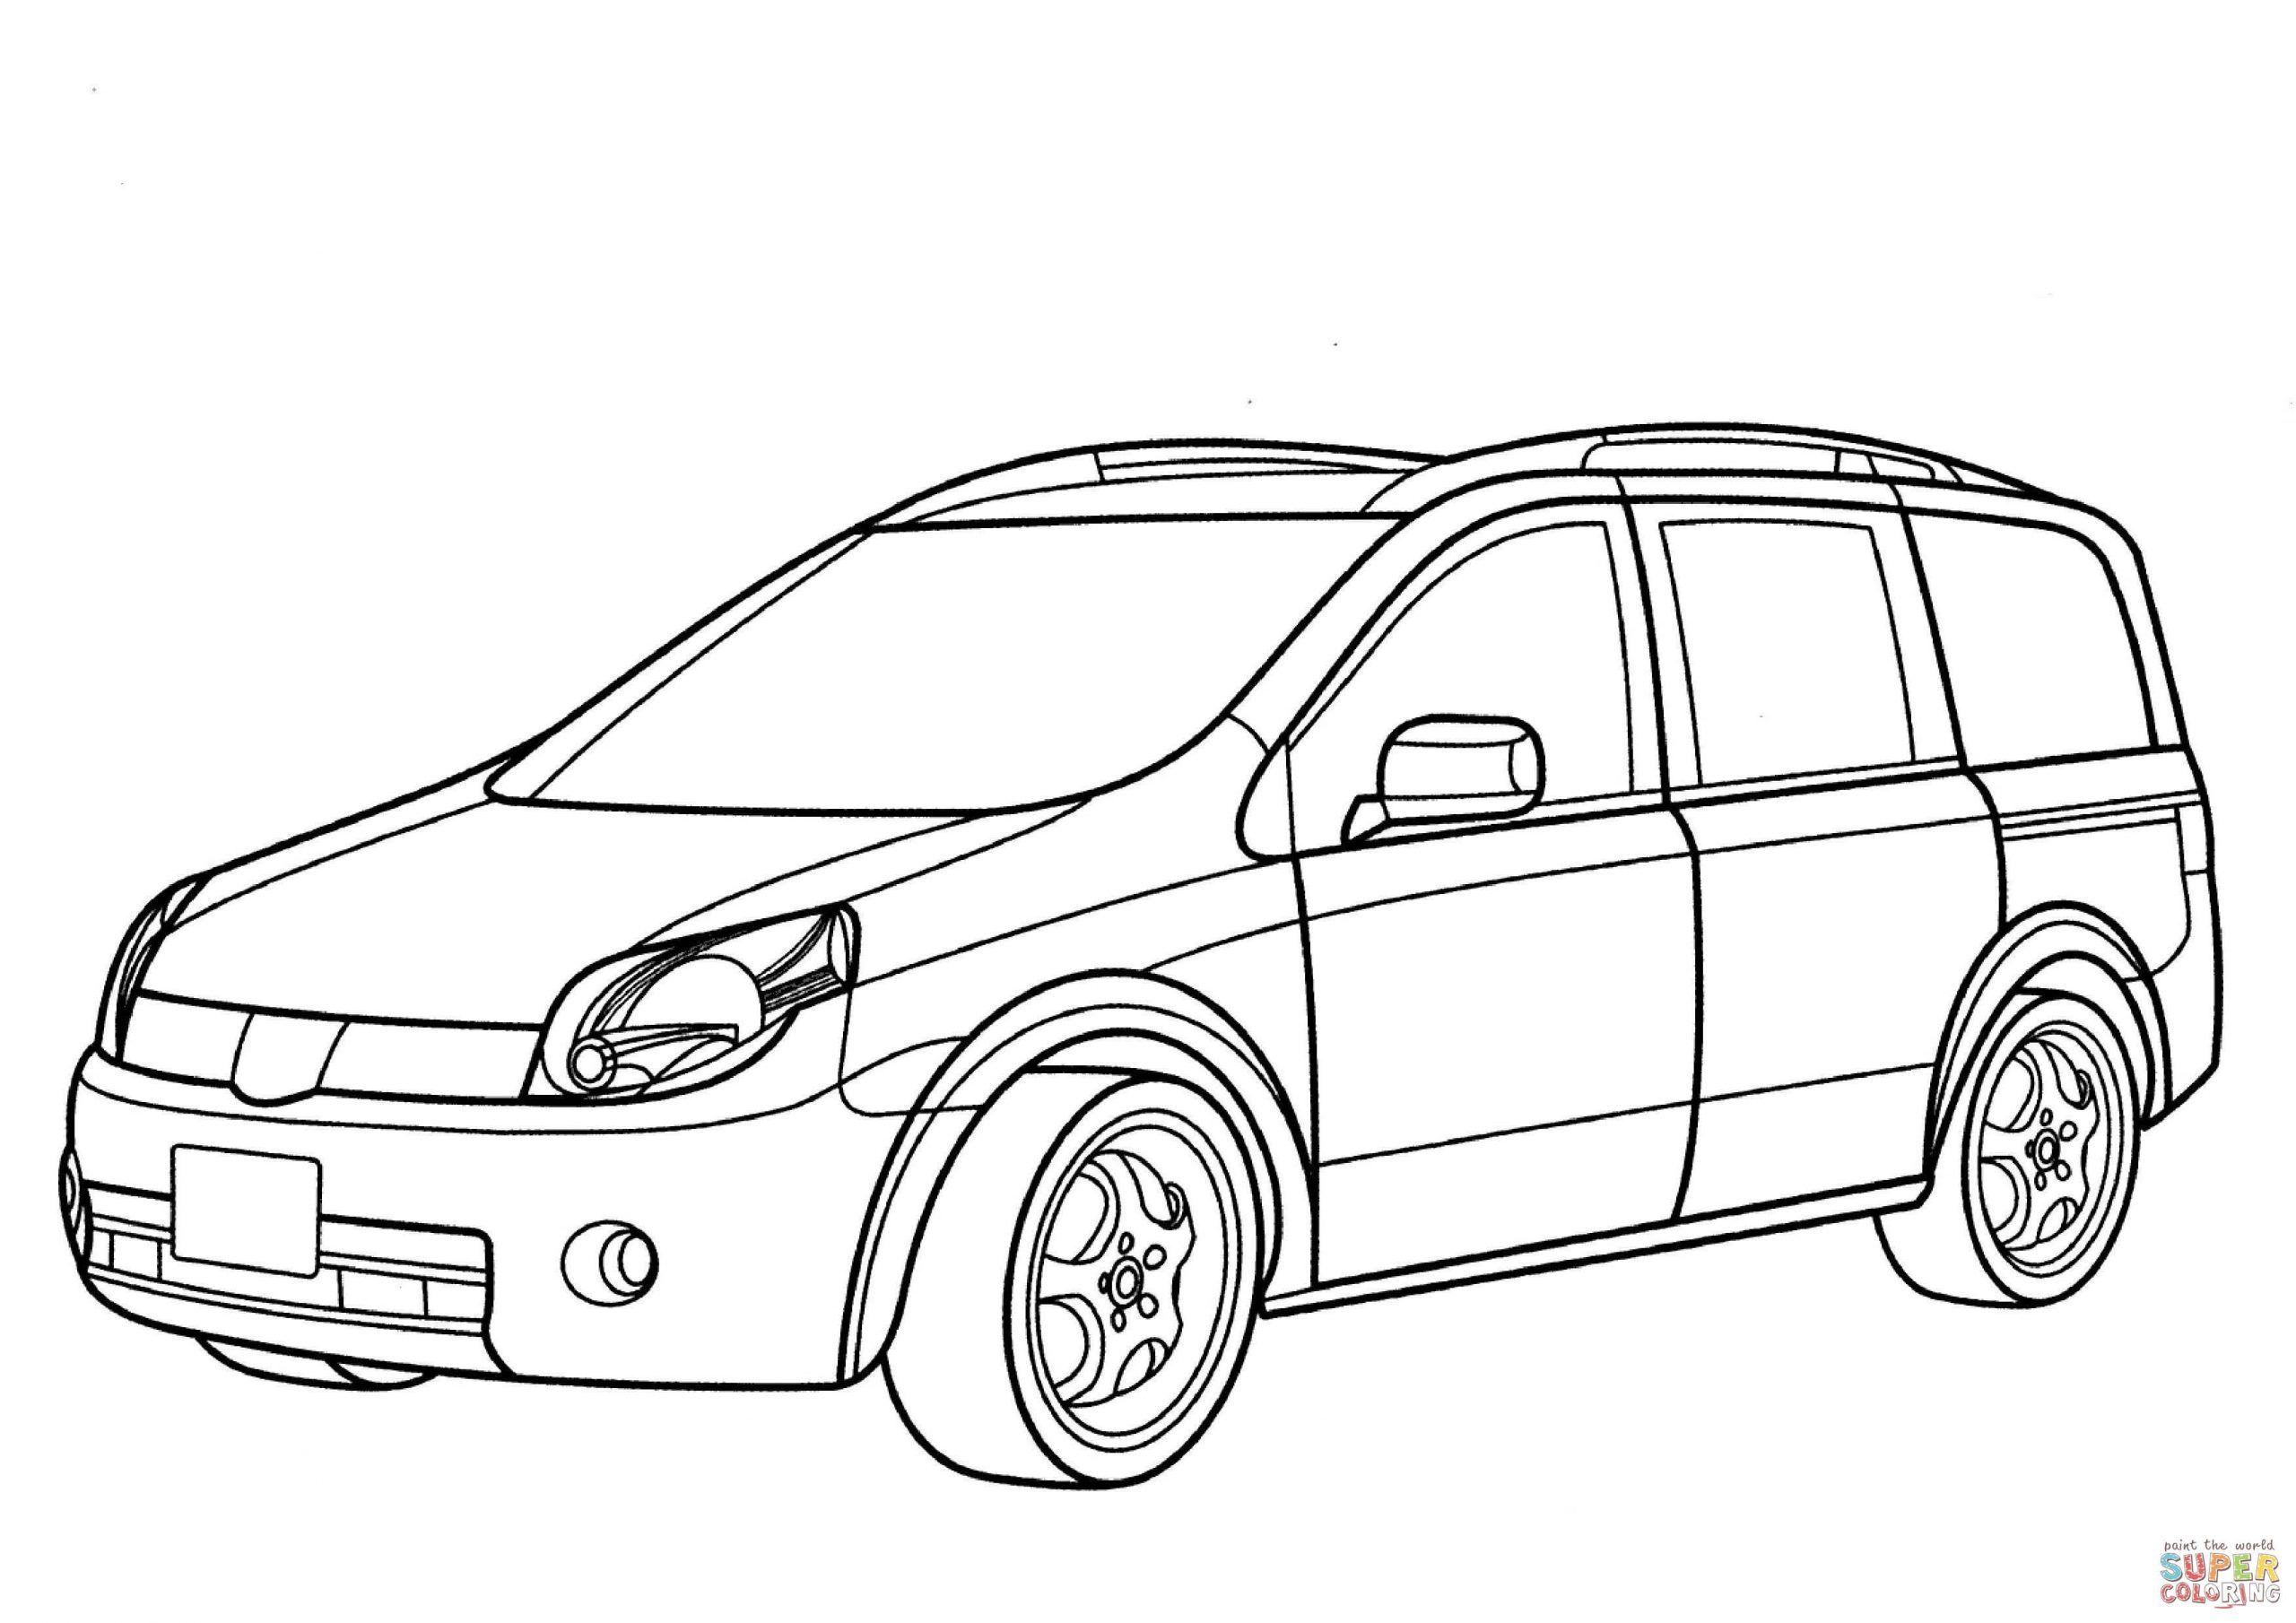 350Z Coloring Pages Coloring Pages avec Nissan Silvia Dessin